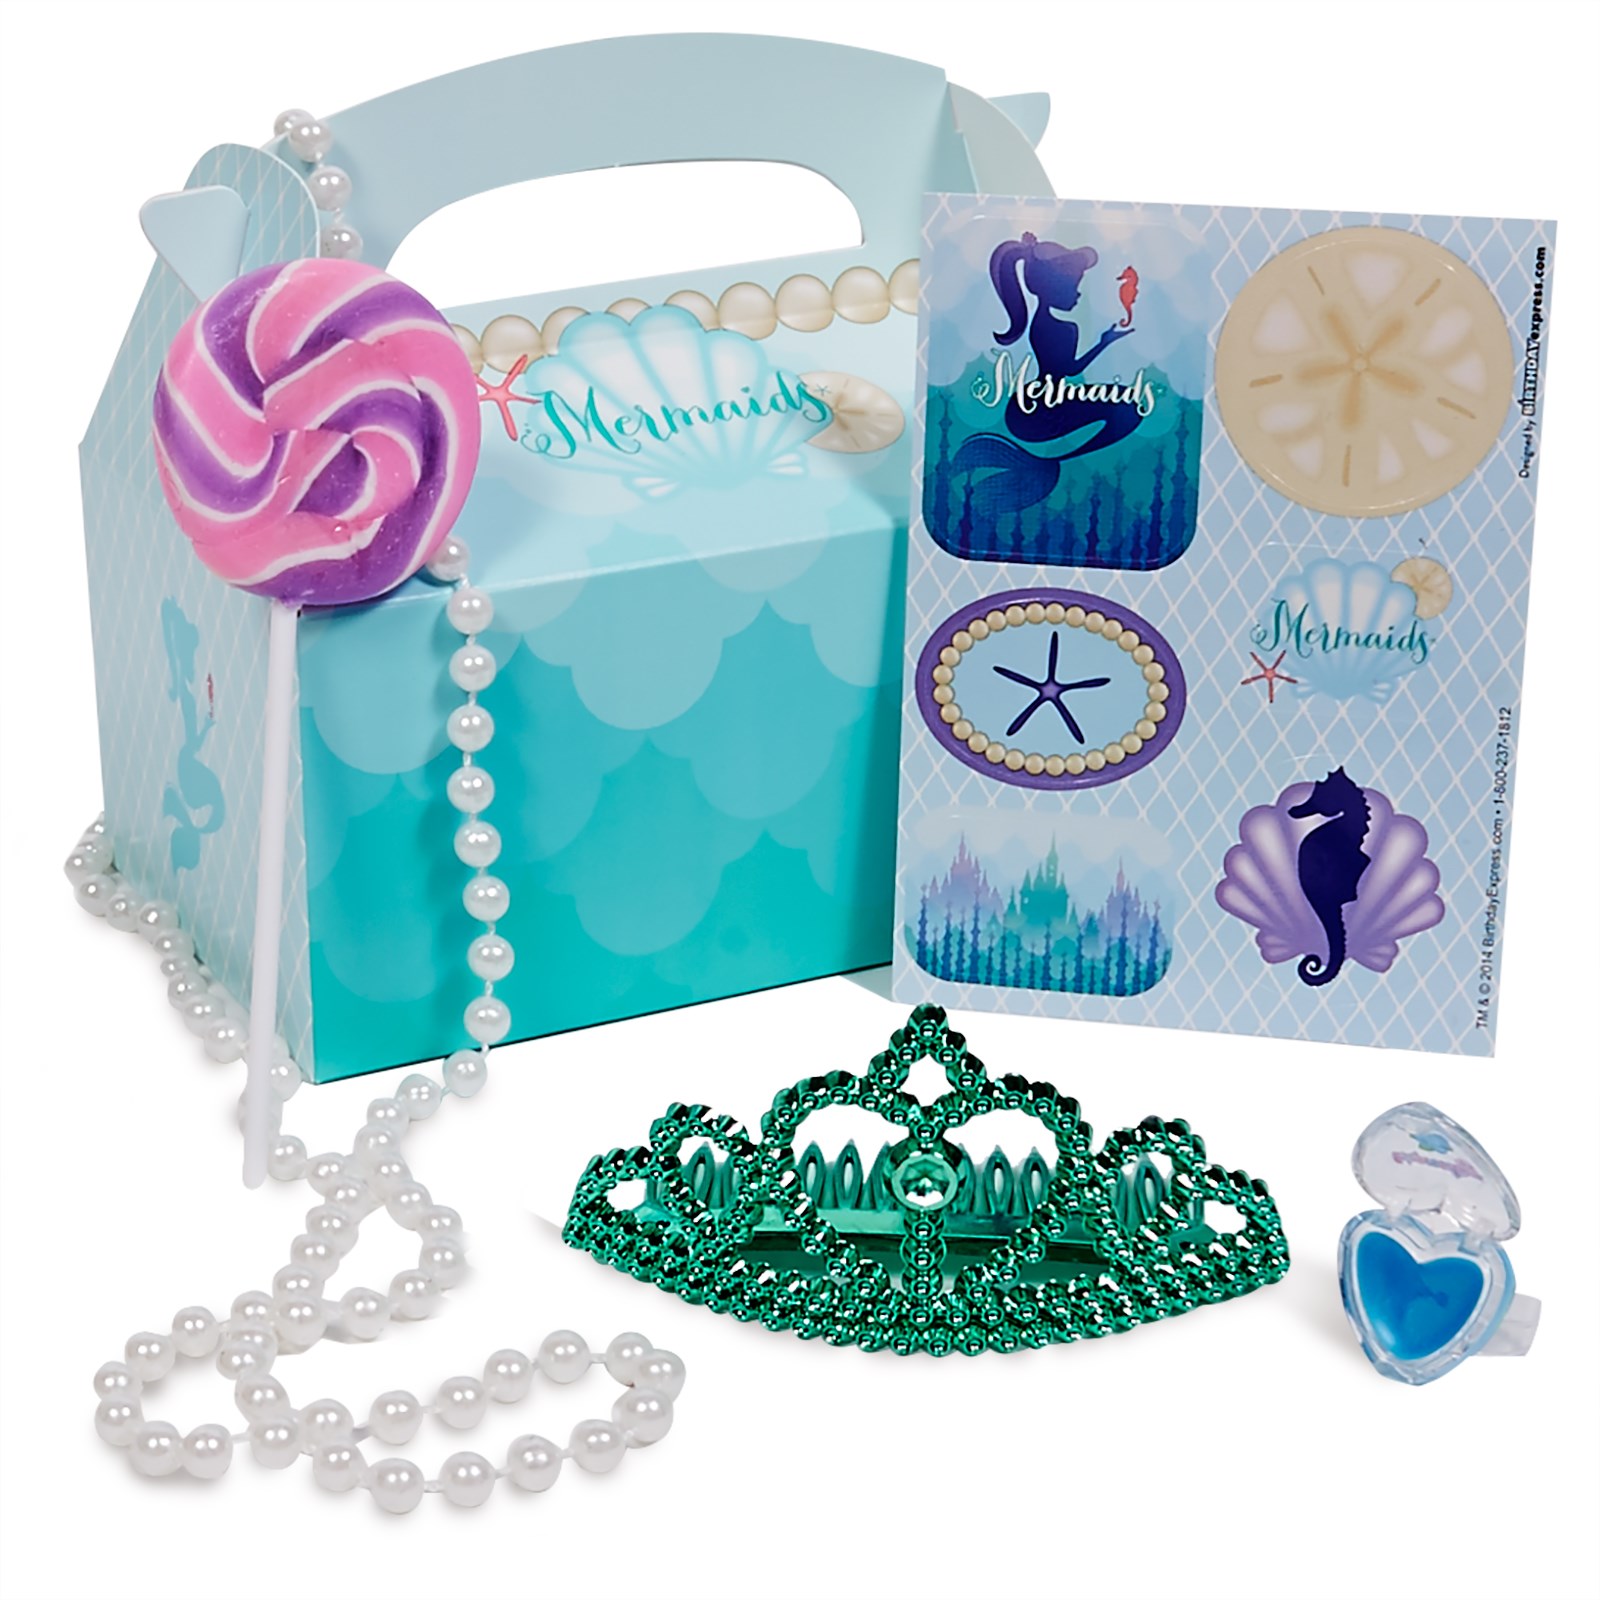 Mermaids Under the Sea Party Favor Box